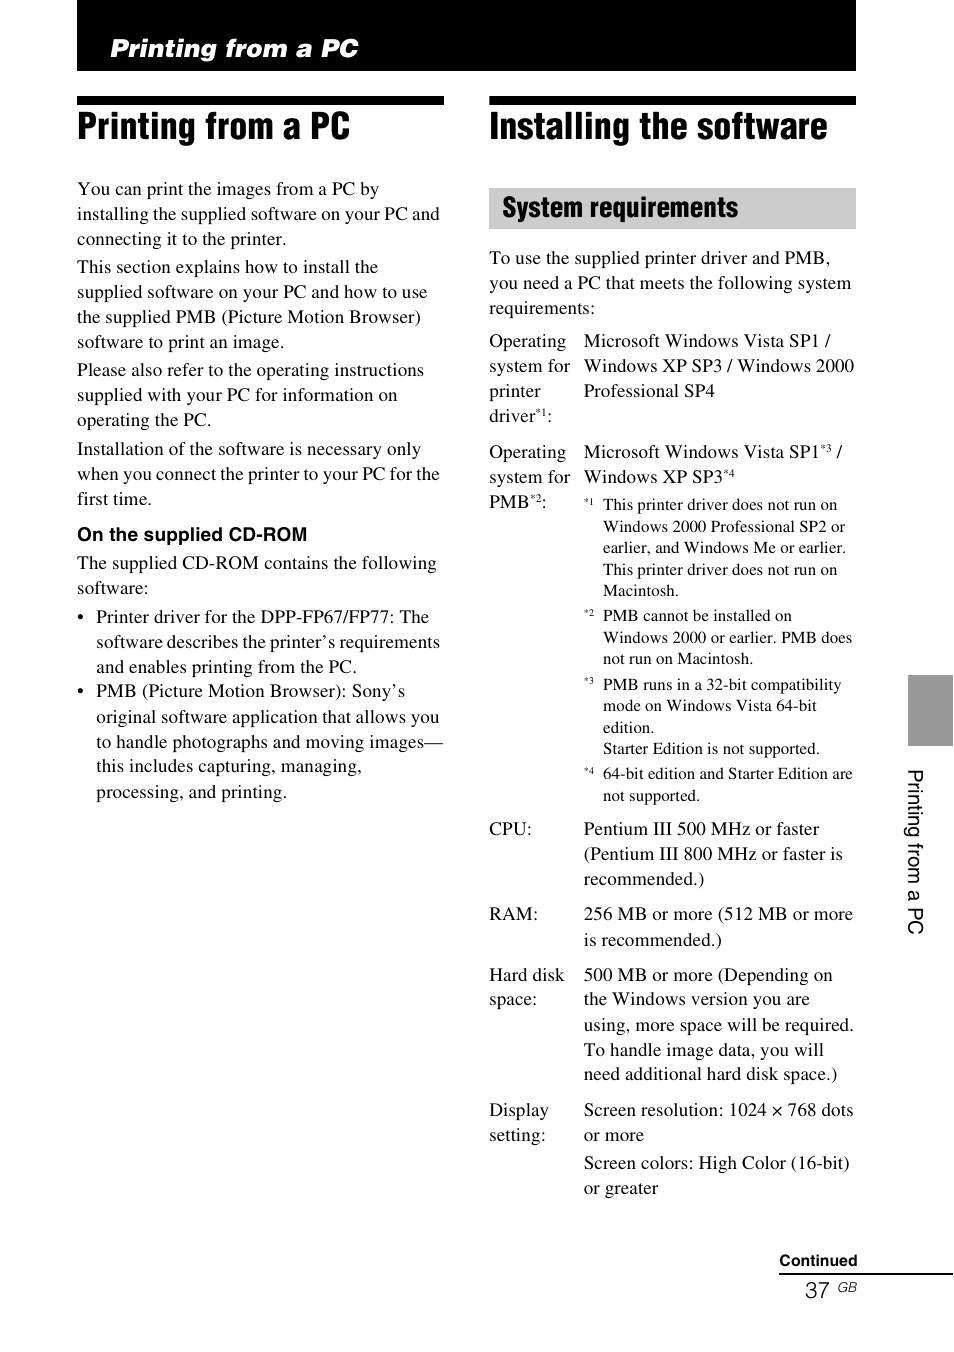 Printing from a pc, Installing the software, System requirements | Sony DPP-FP77 User Manual | Page 37 / 72